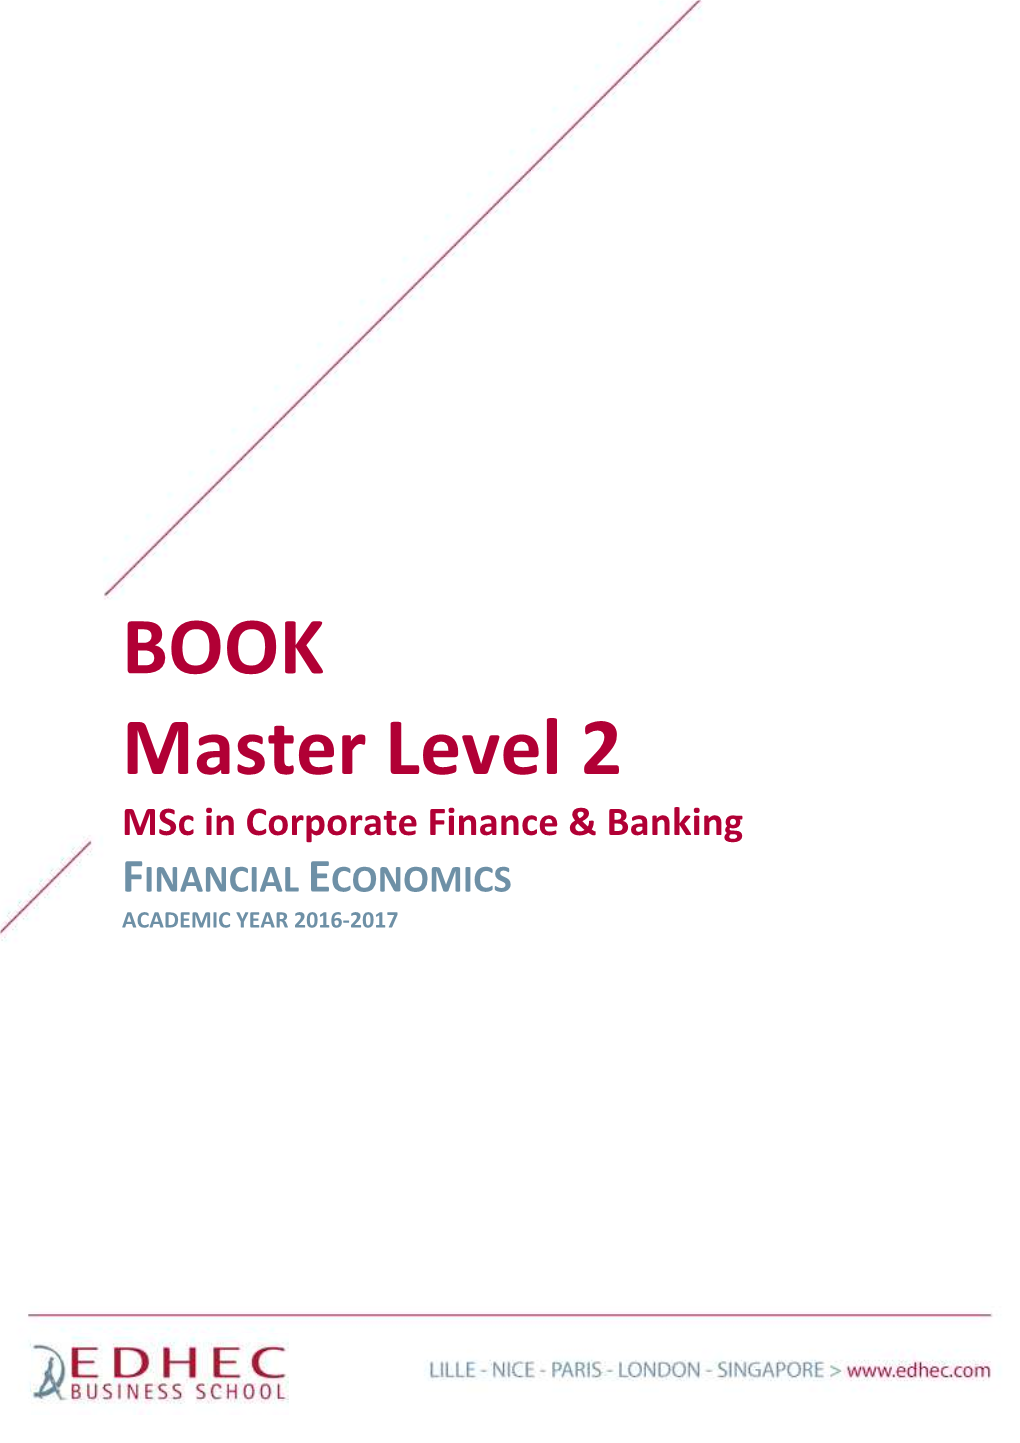 BOOK Master Level 2 Msc in Corporate Finance & Banking FINANCIAL ECONOMICS ACADEMIC YEAR 2016-2017